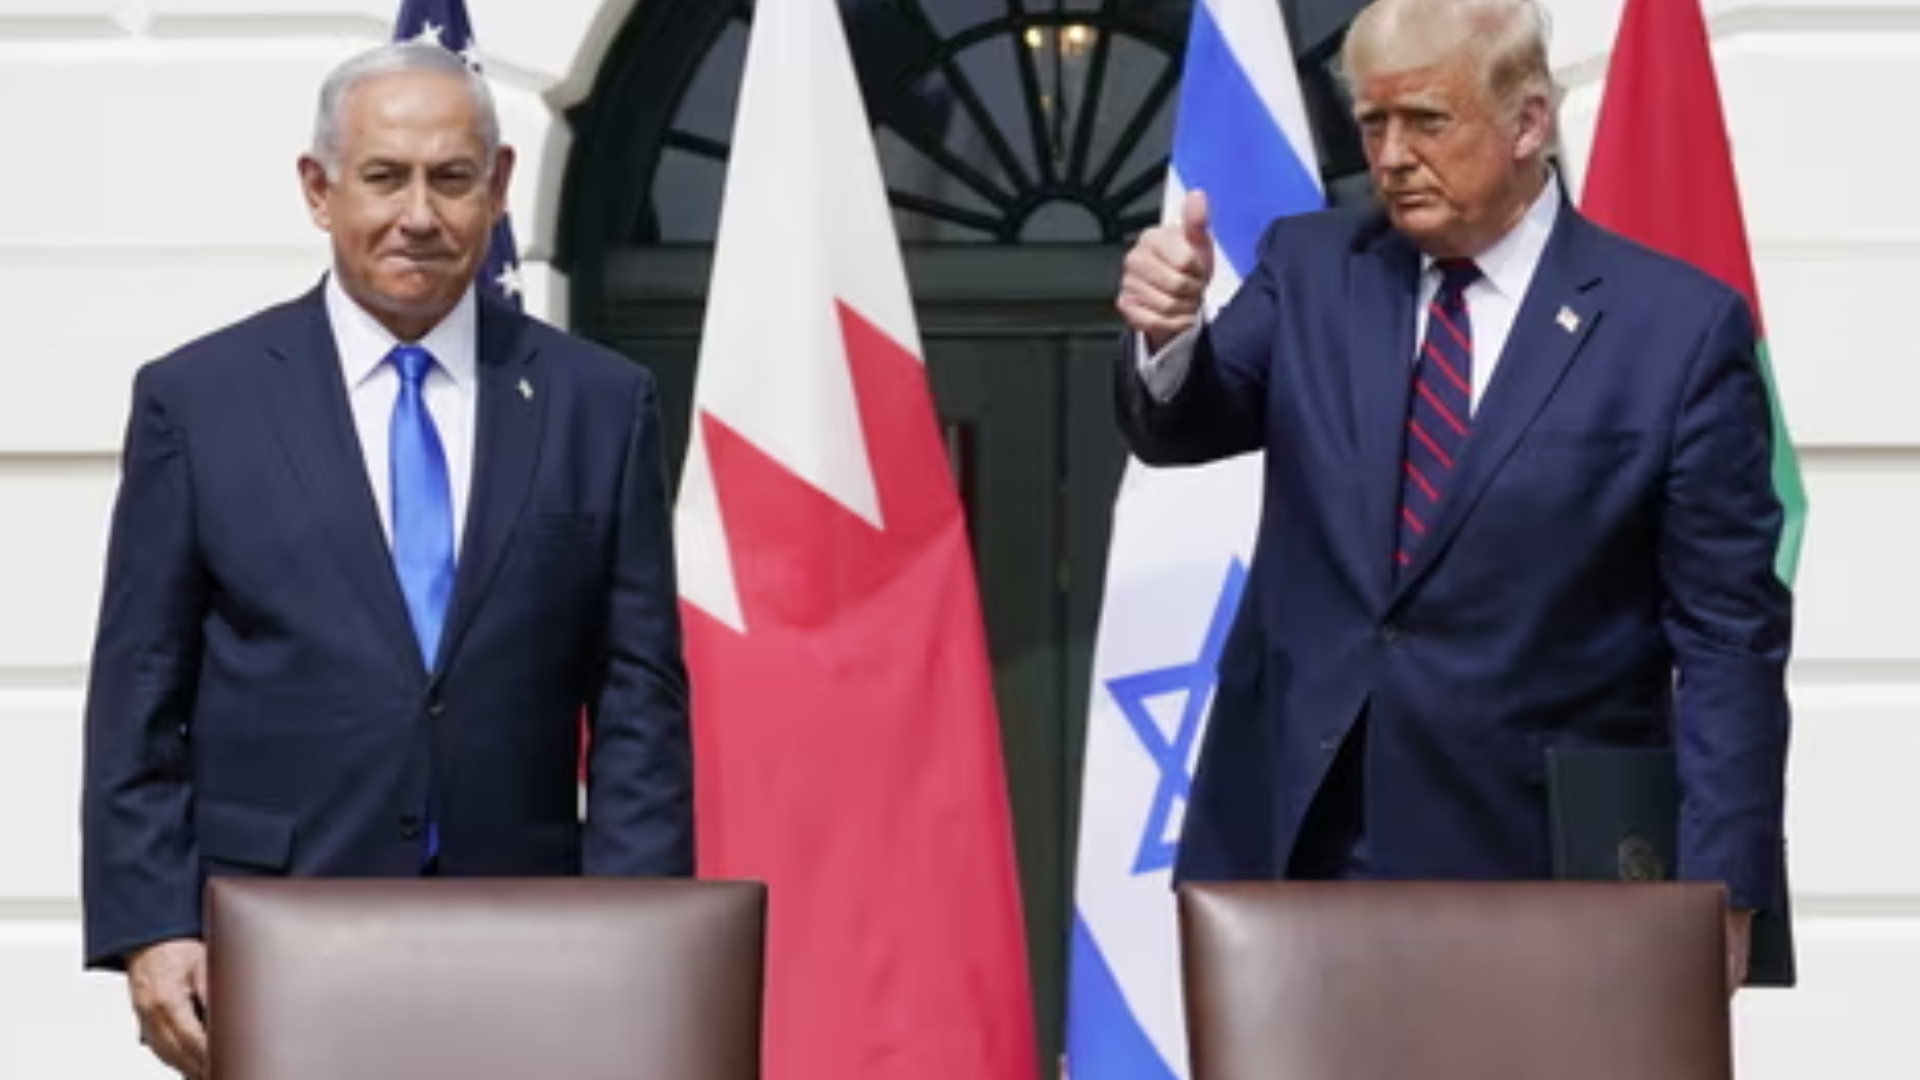 Netanyahu Praises Trump for Abraham Accords and Key Policy Decisions